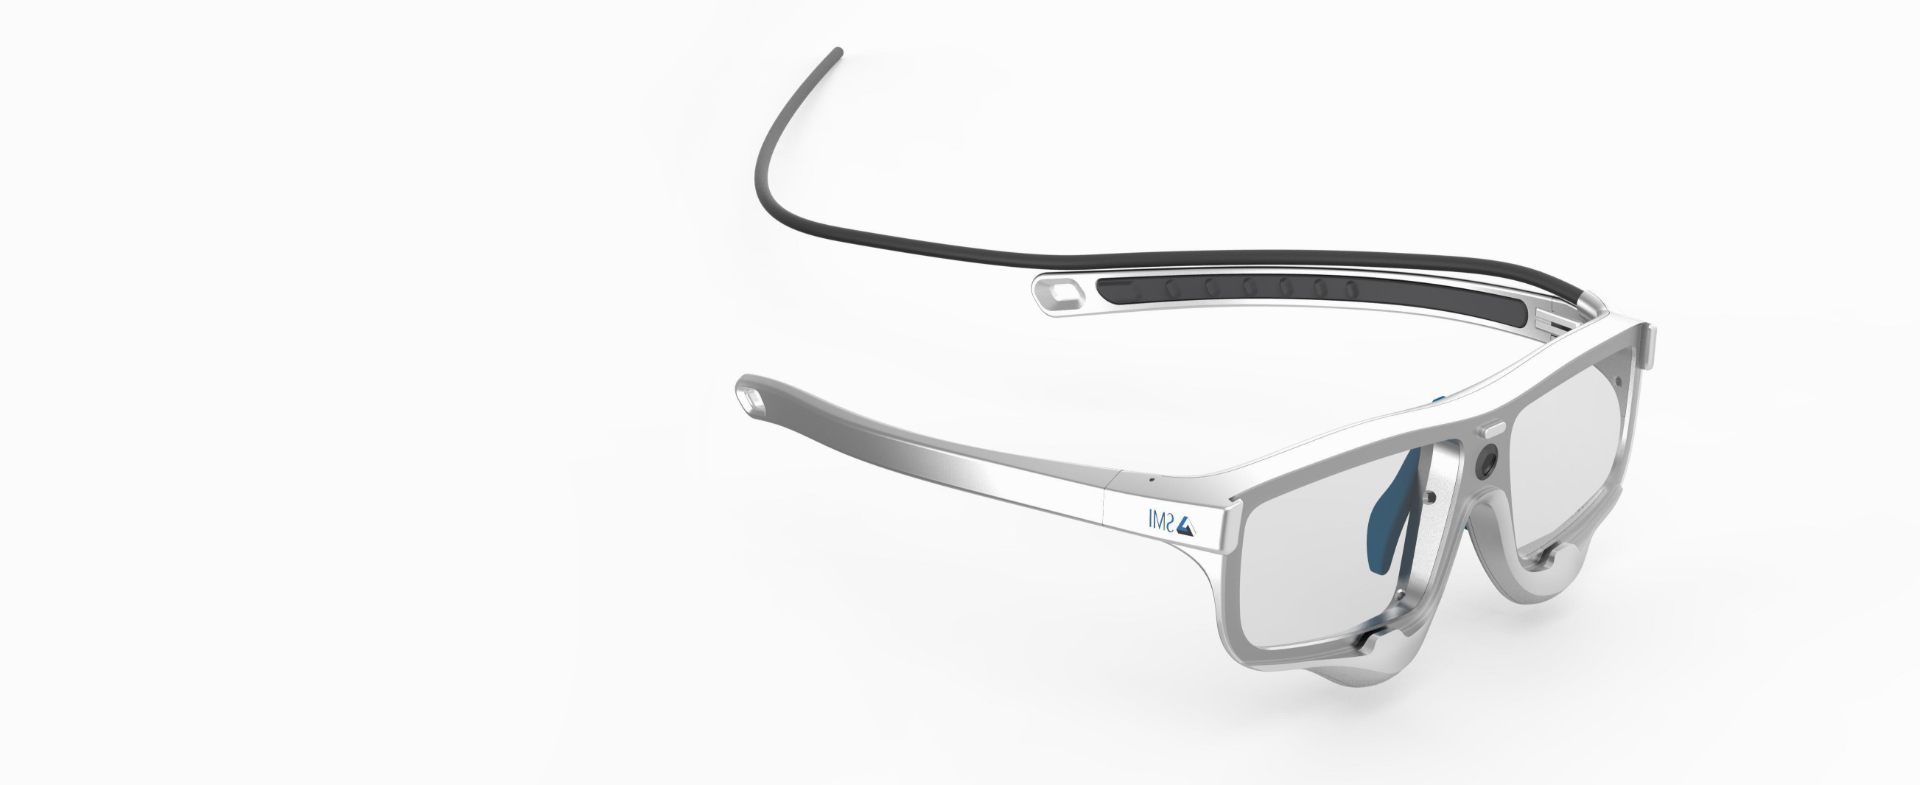 Eye-tracking glasses mobile devices fitted for around the eyes